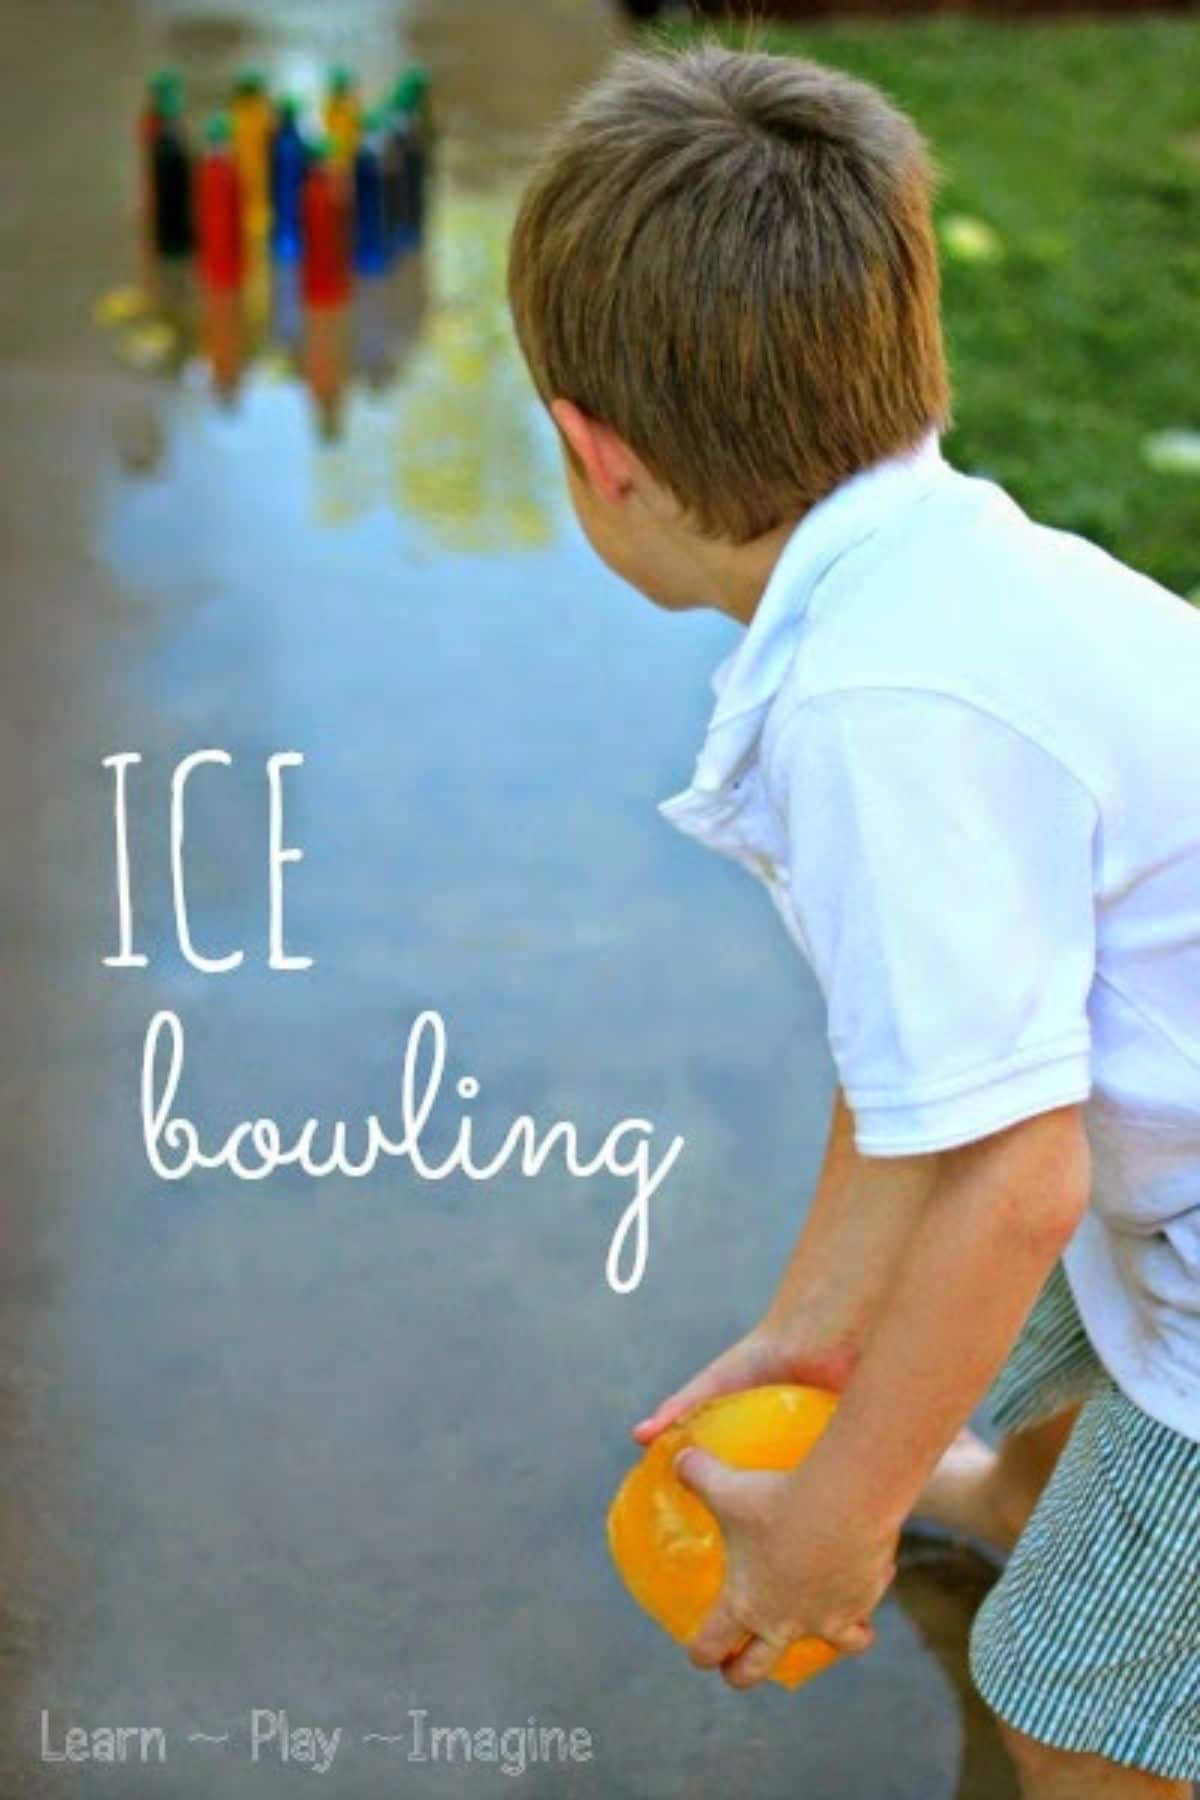 text reads "ice bowling. Learn, play, imagine" The image is of a boy in a white shirt facing away from the camera holding a yellow water balloon. He is about to throw it at a group of bottles